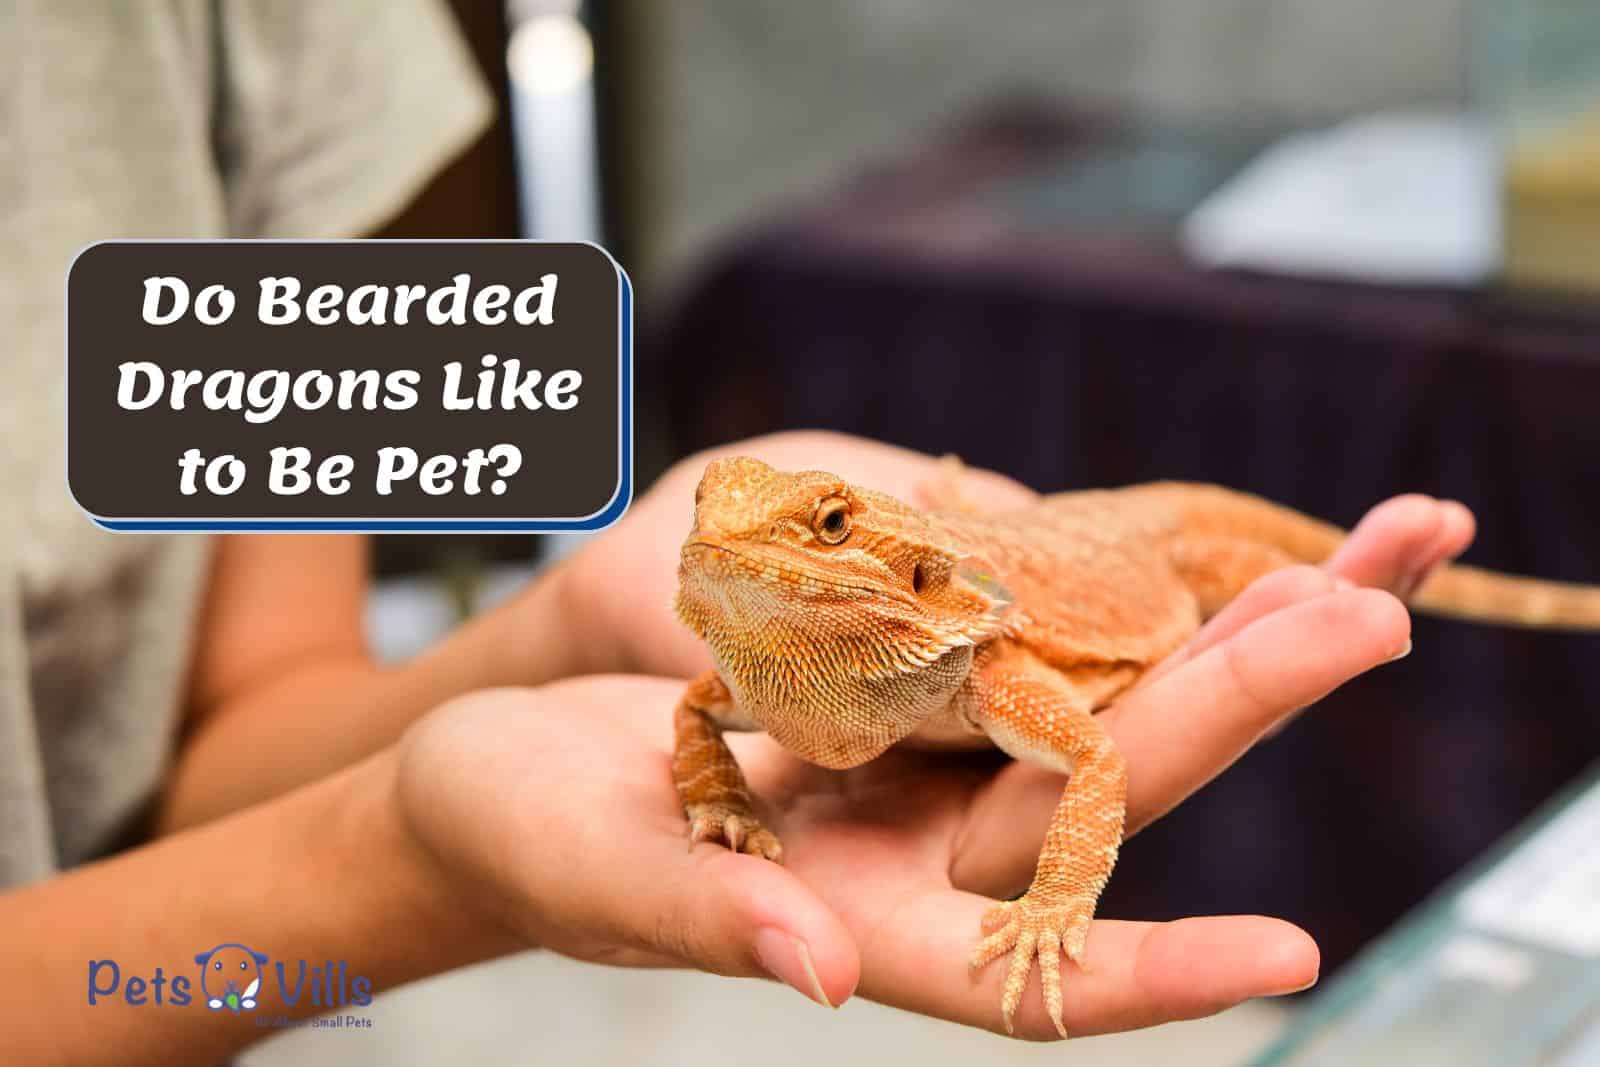 lady holding a beardie but do bearded dragons like to be pet?